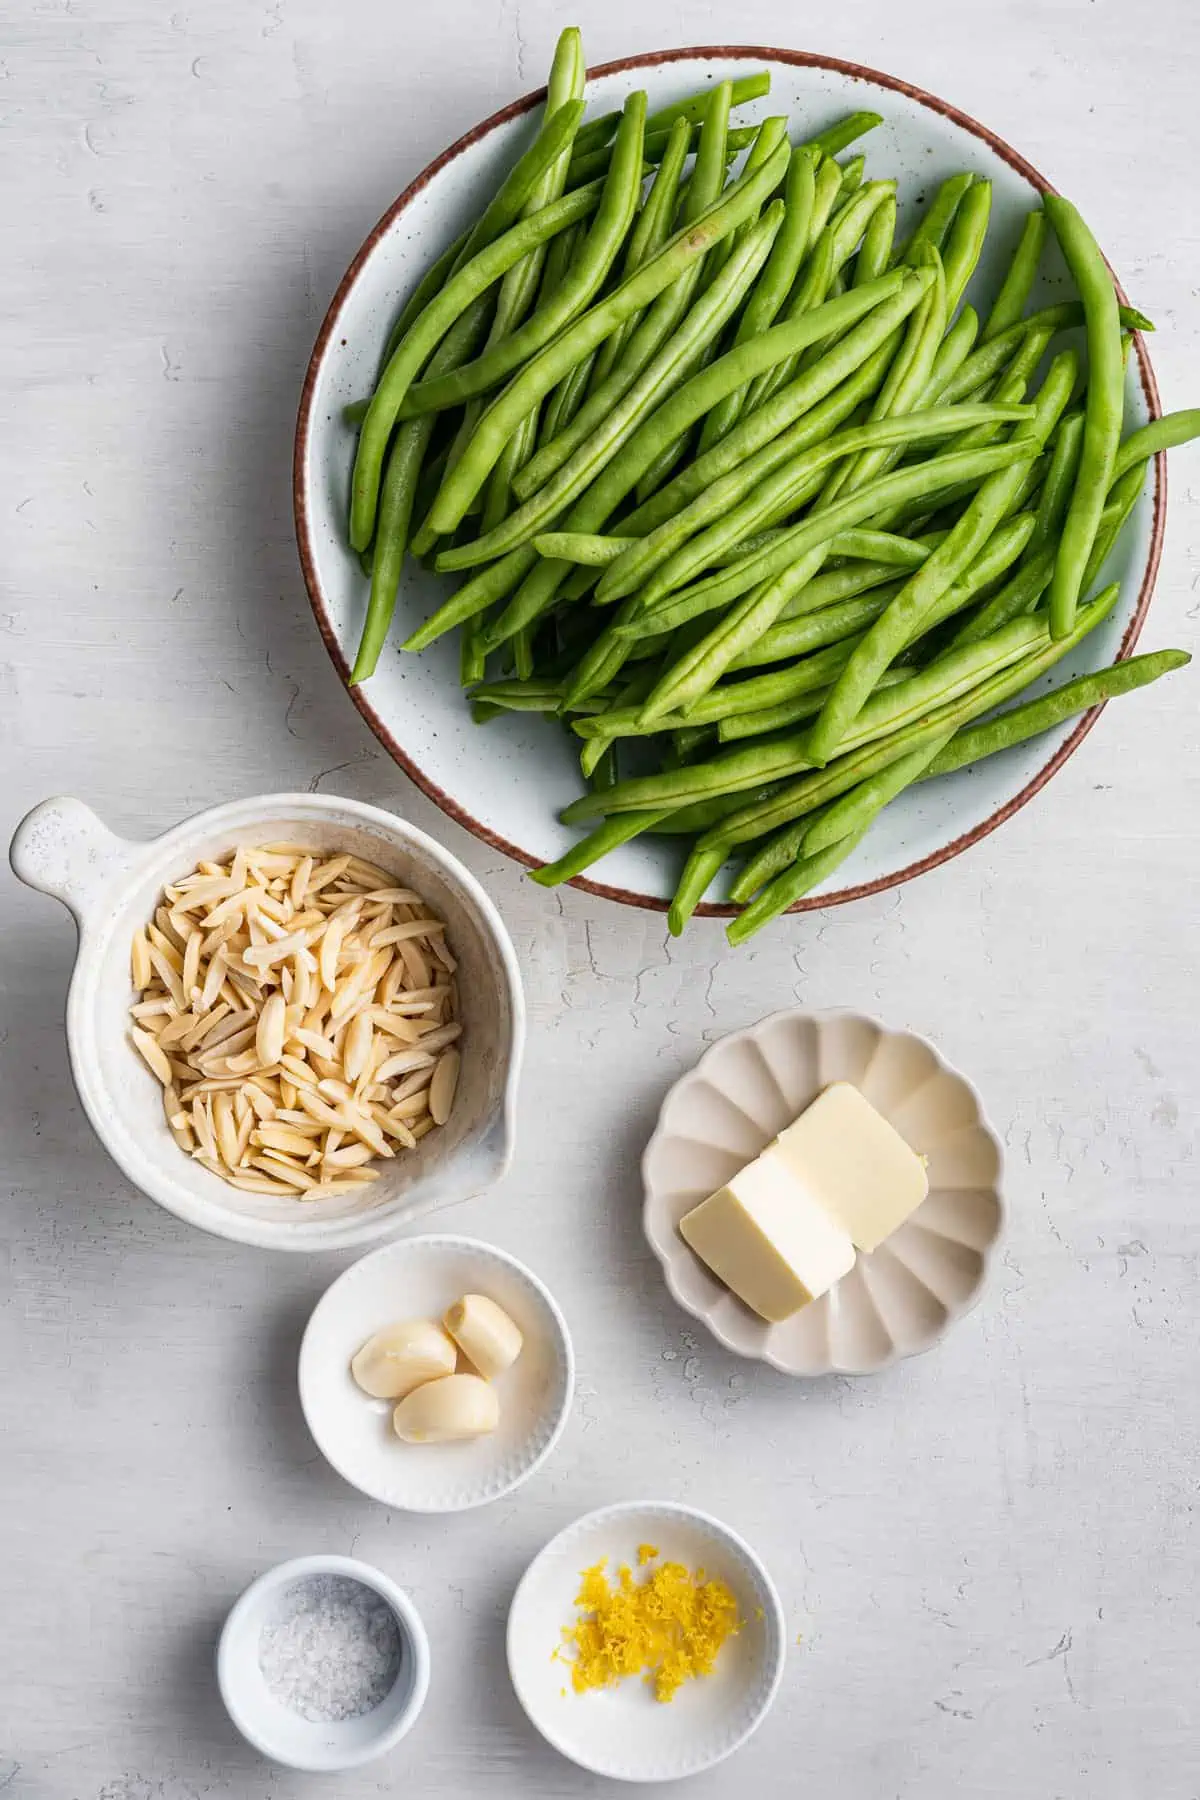 Overhead view of the ingredients for green bean almondine: a bowl of green beans, a bowl of slivered almonds, a bowl of vegan butter, a bowl of garlic, a bowl of lemon zest, and a bowl of salt